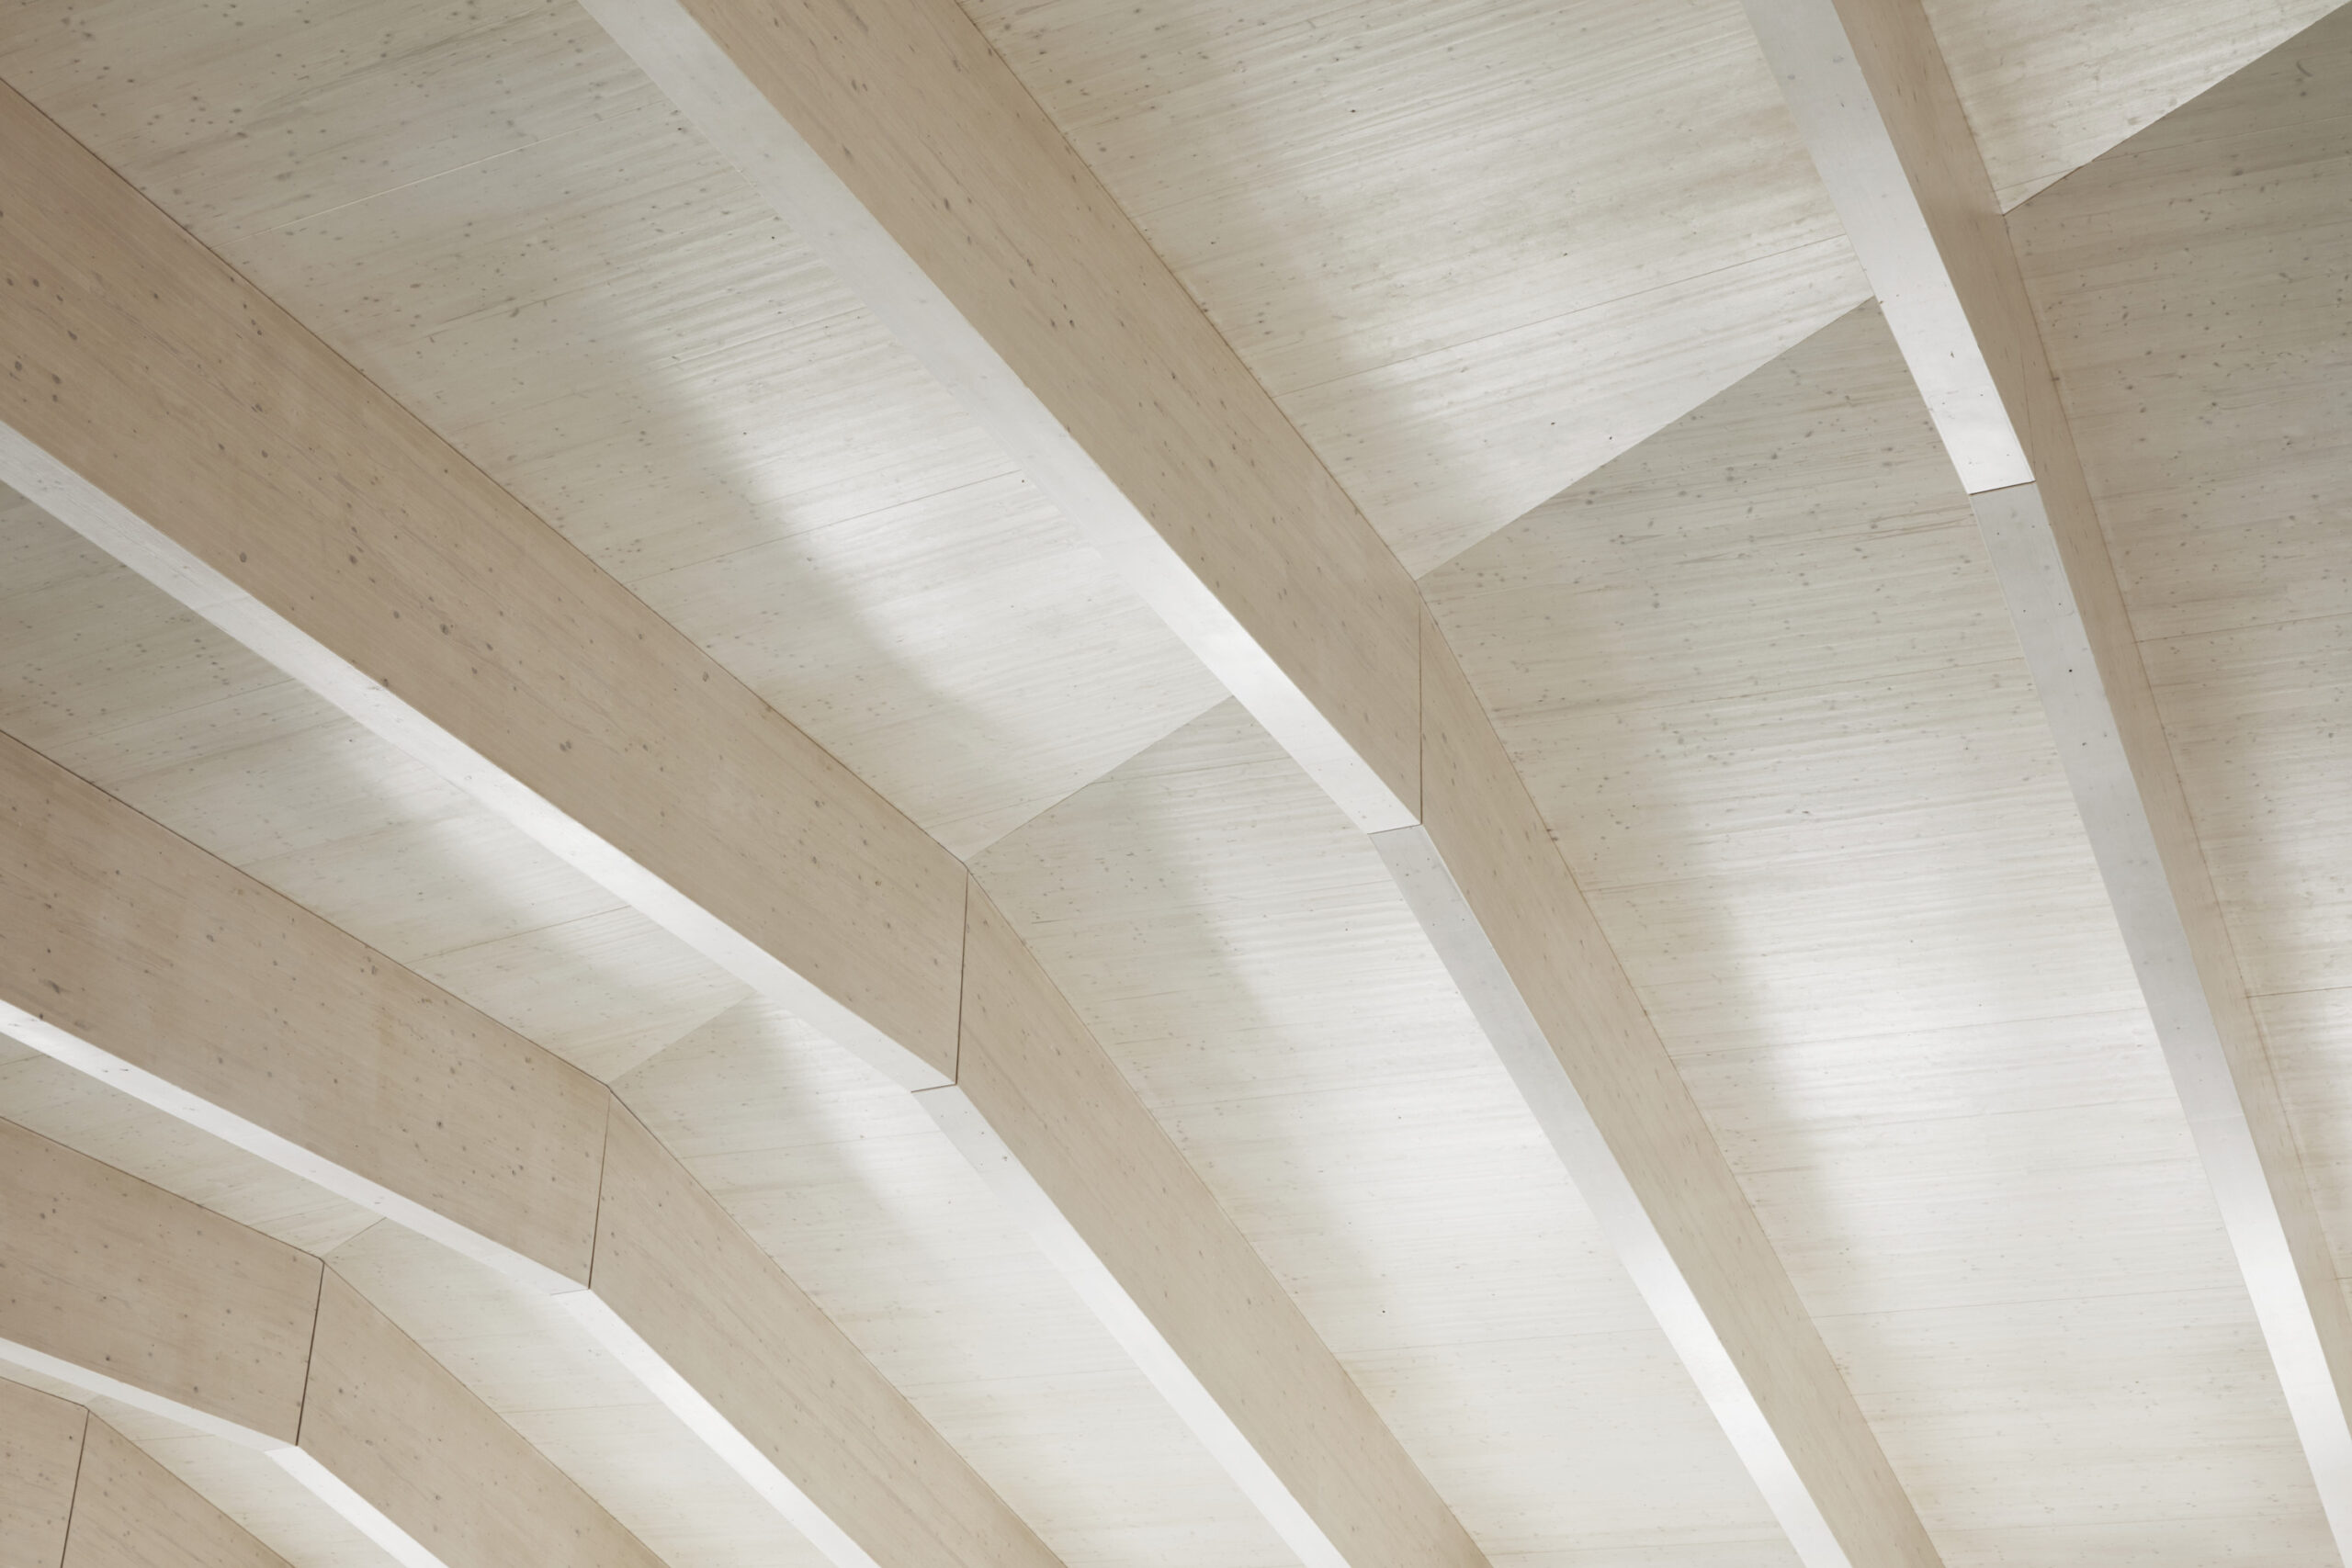 Detail interior shot of the timber roof in the swimming pool space